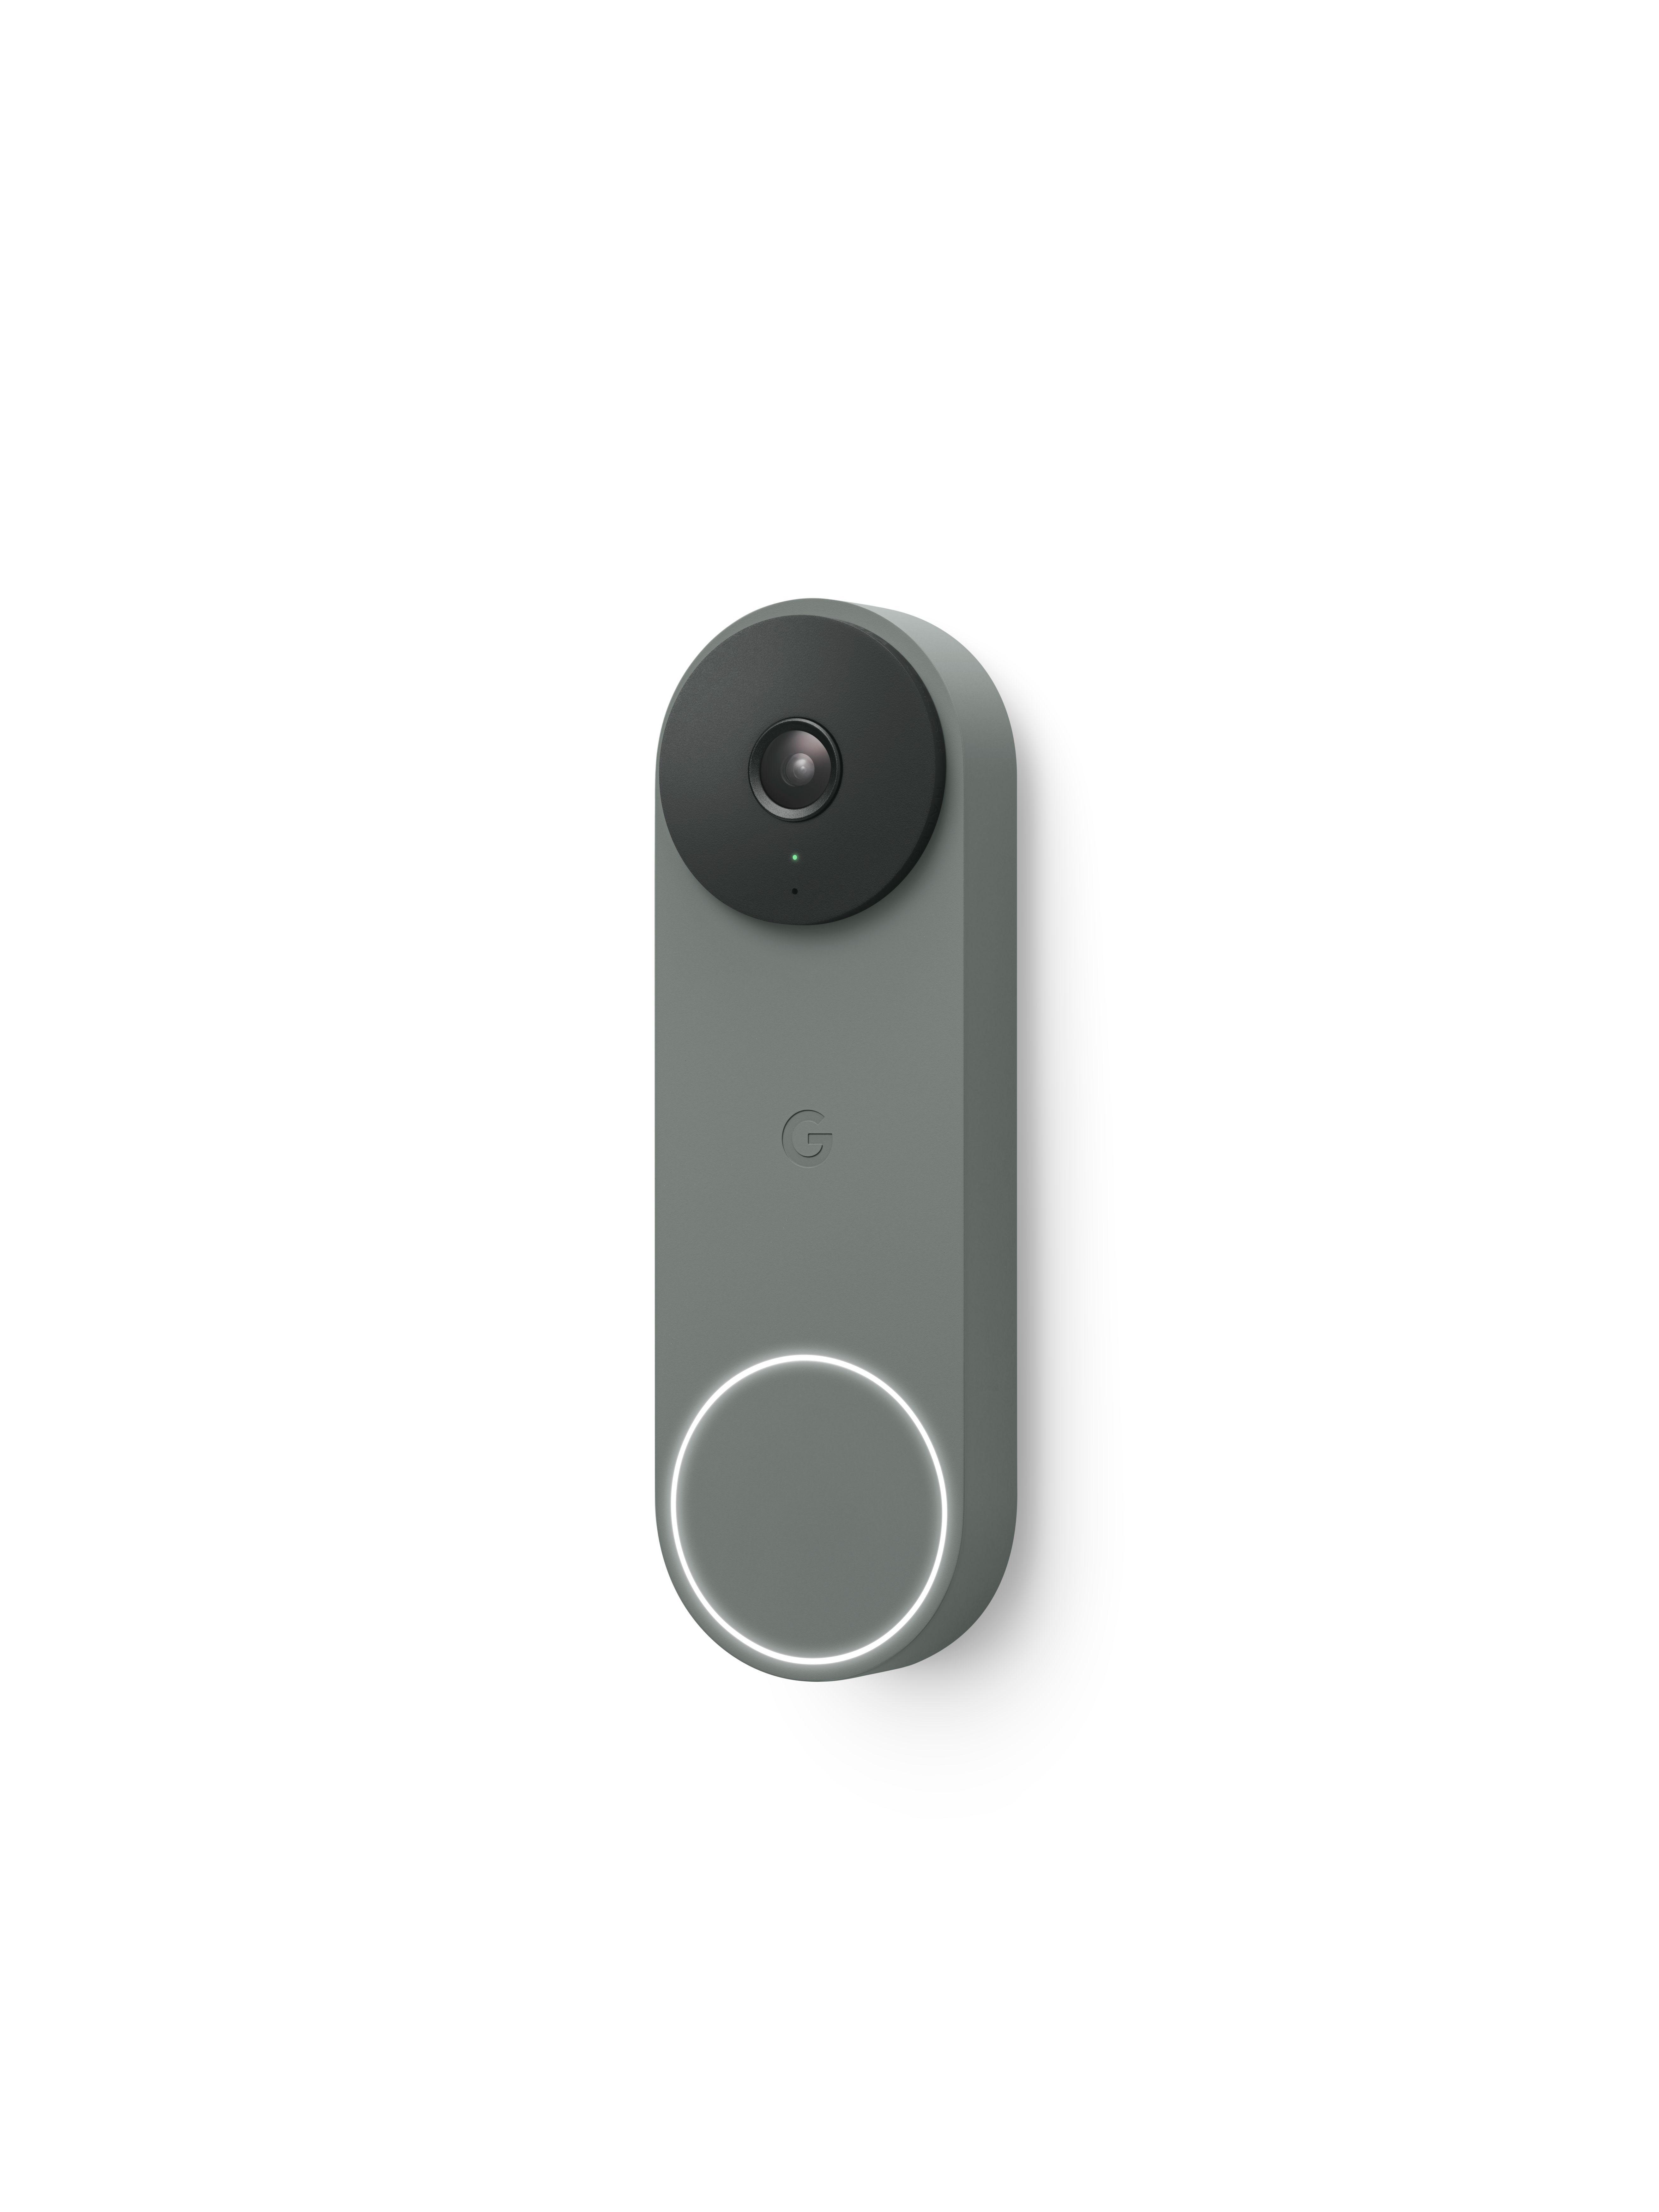 Google debuts new Nest Doorbell Wired, Nest Wifi Pro and launches fully new Google  Home app preview